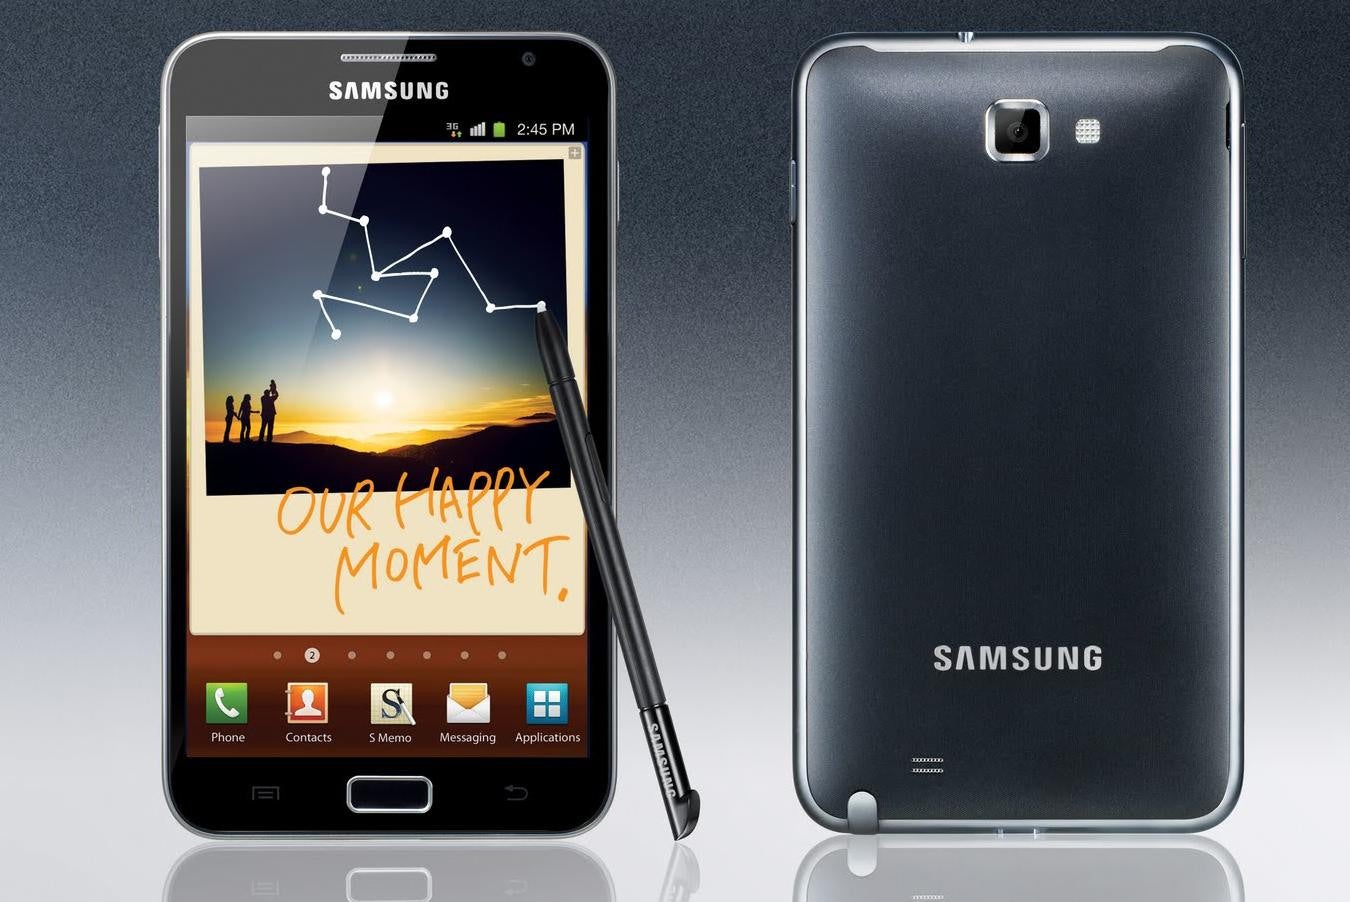 From stardom to lessons learned, a look back at the Samsung Galaxy Note line